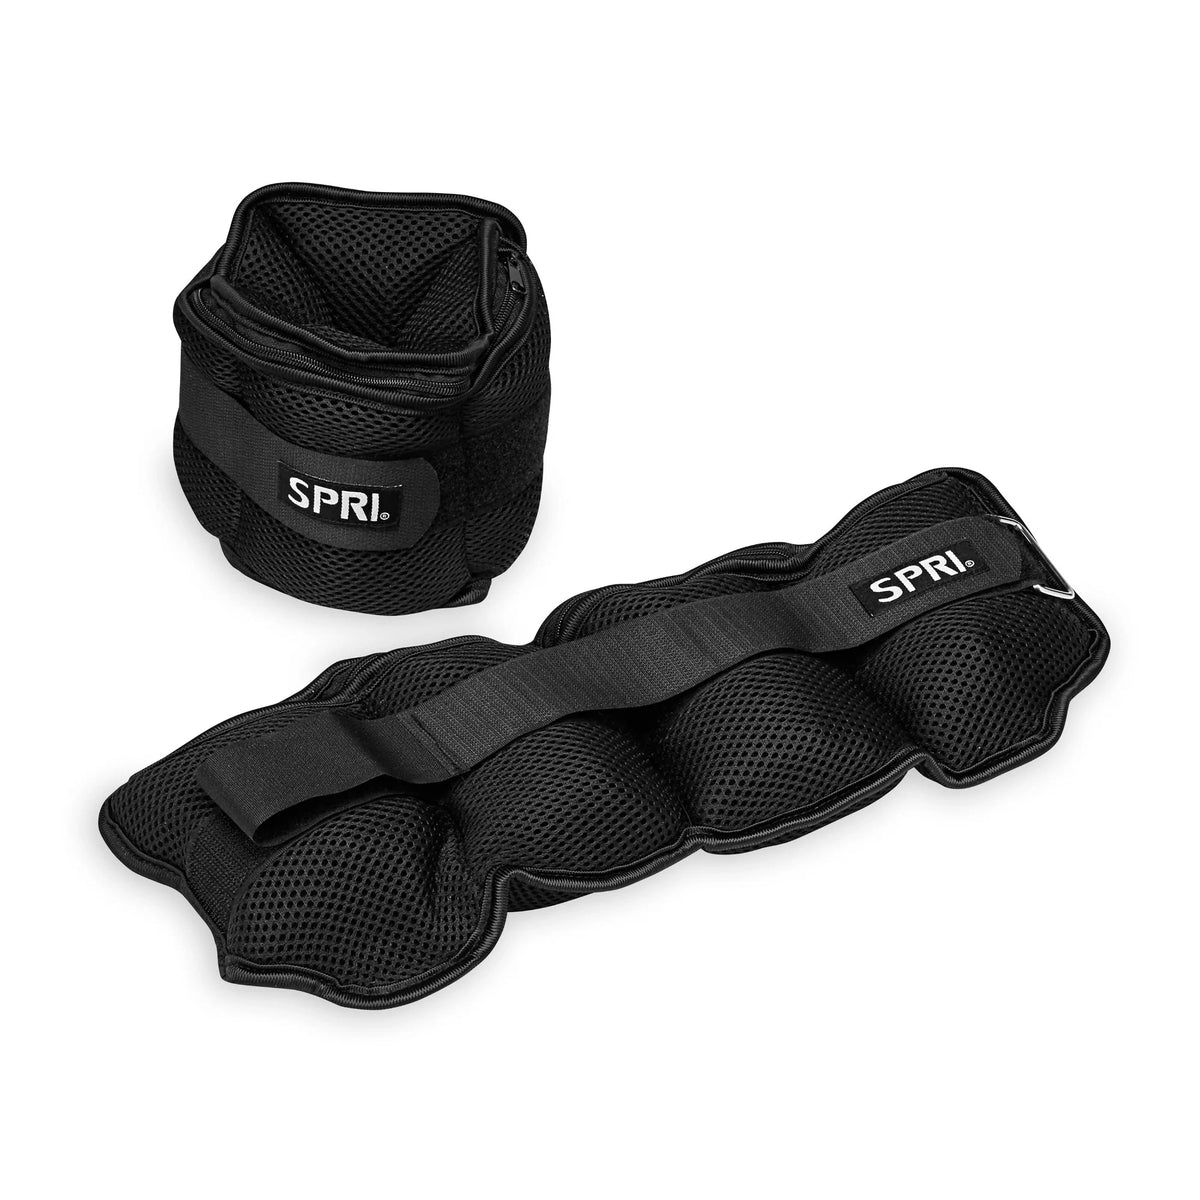 10lb ankle weights with one rolled and one flat